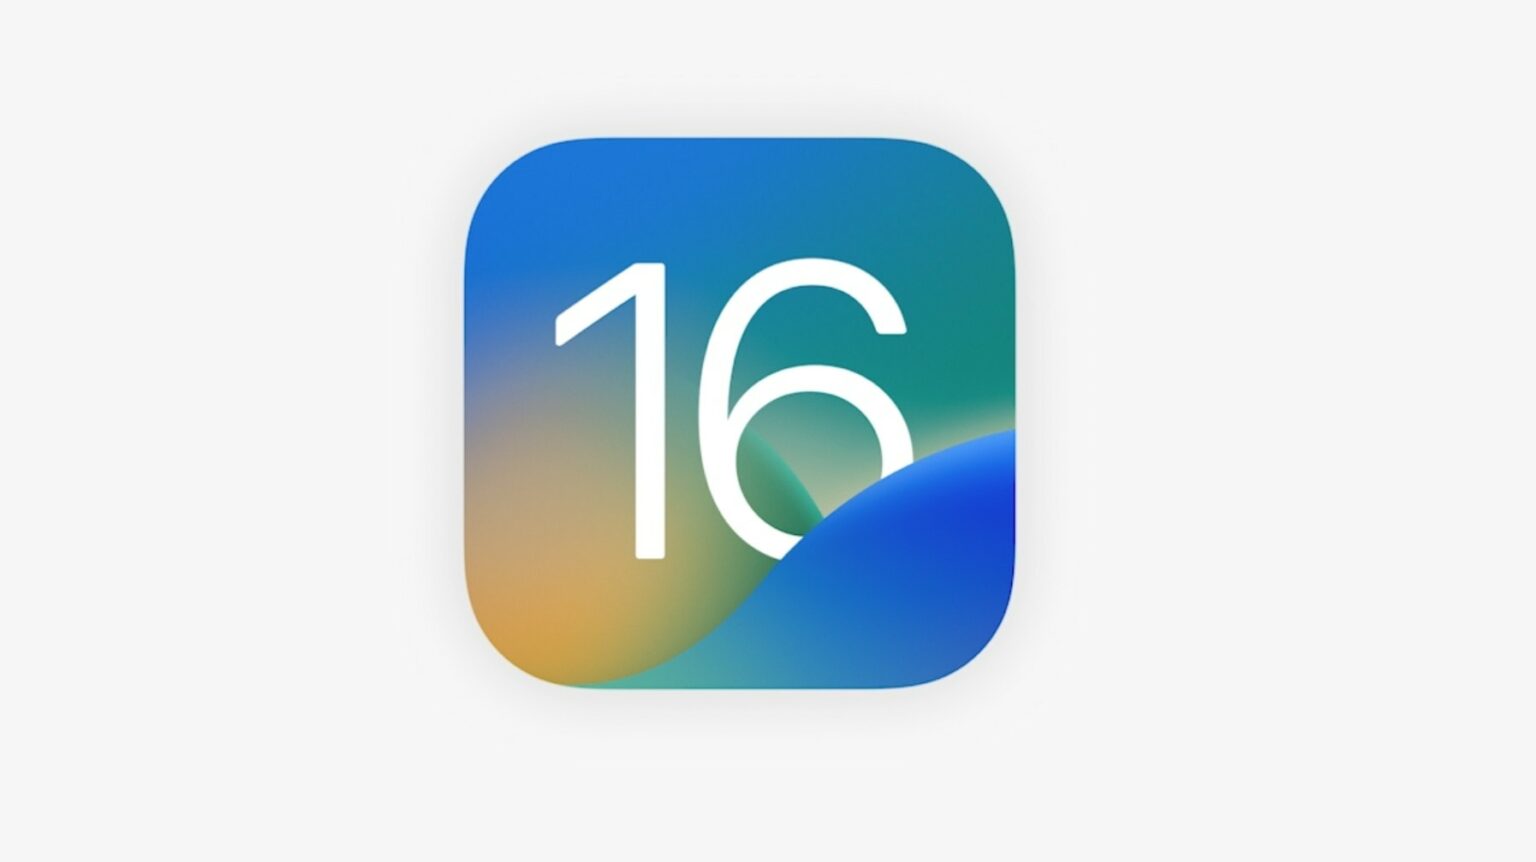 Apple is making a multitude of changes with iOS 16.